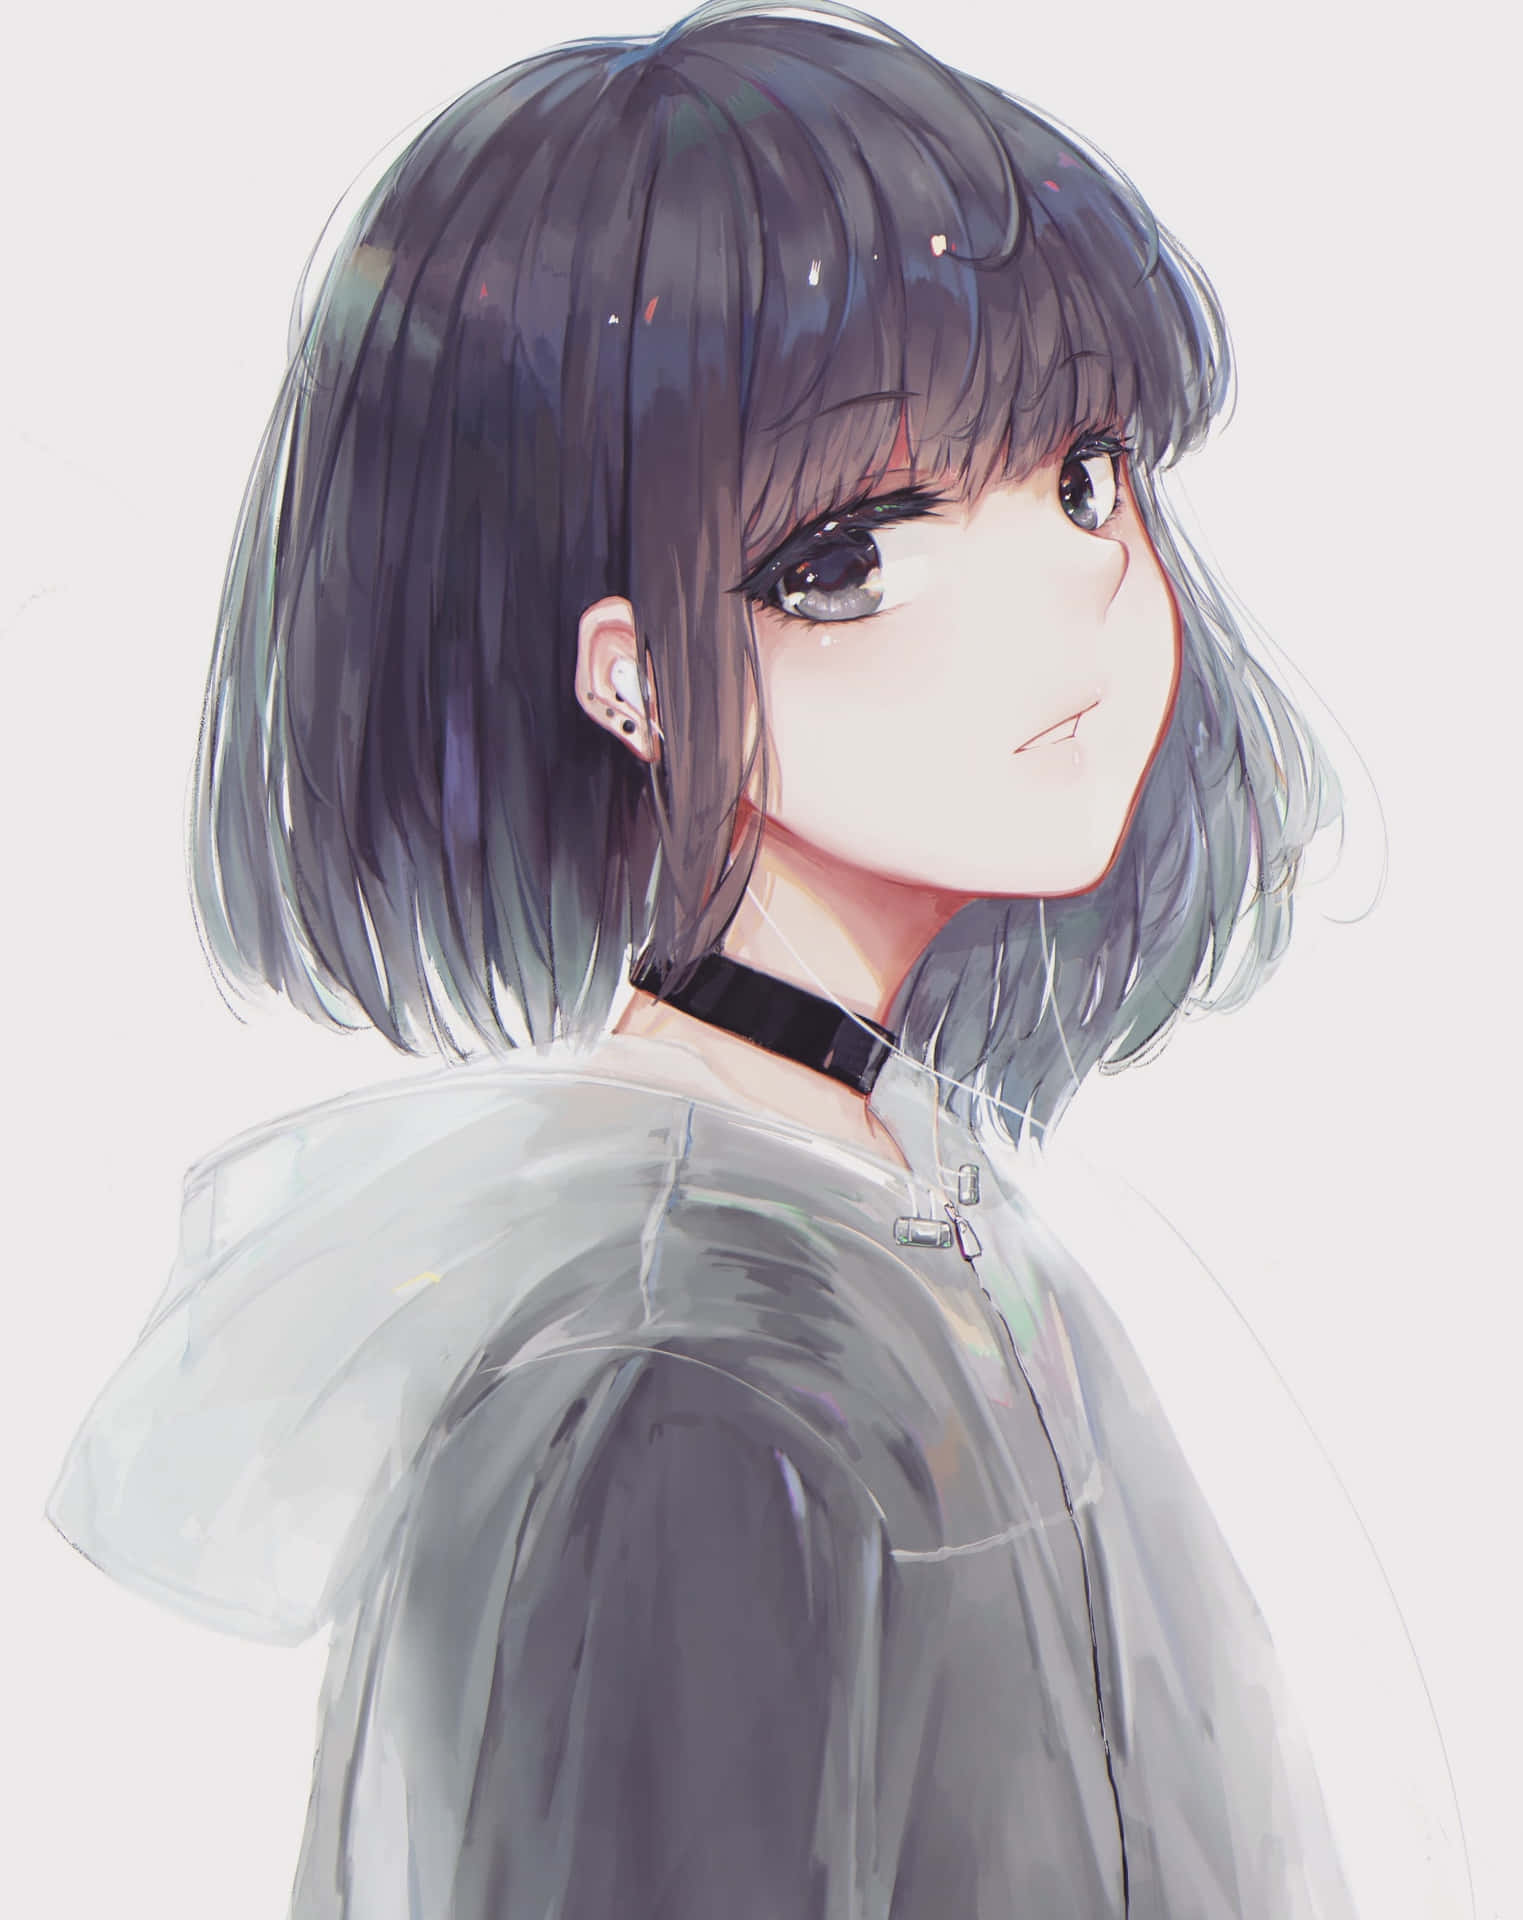 Short Haired Anime Girl Profile Picture